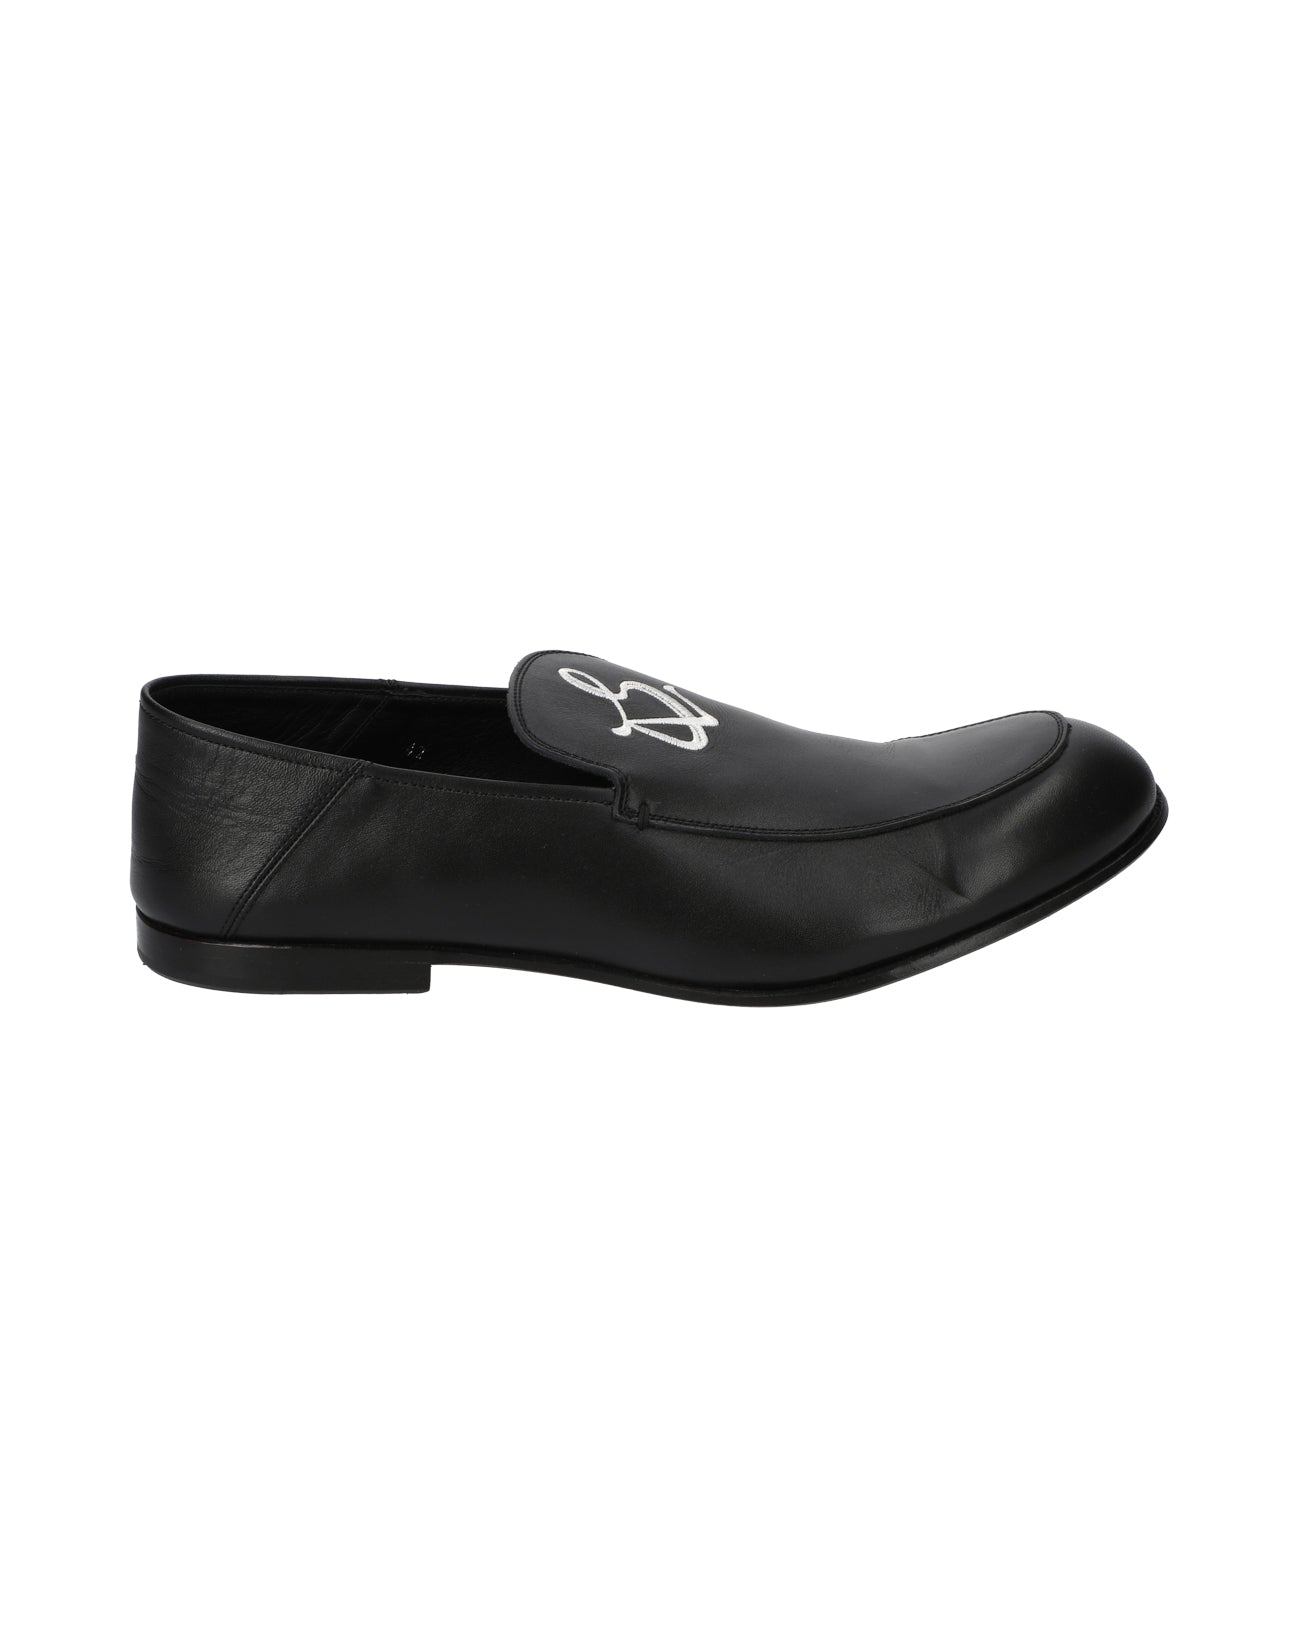 Classic loafers - black